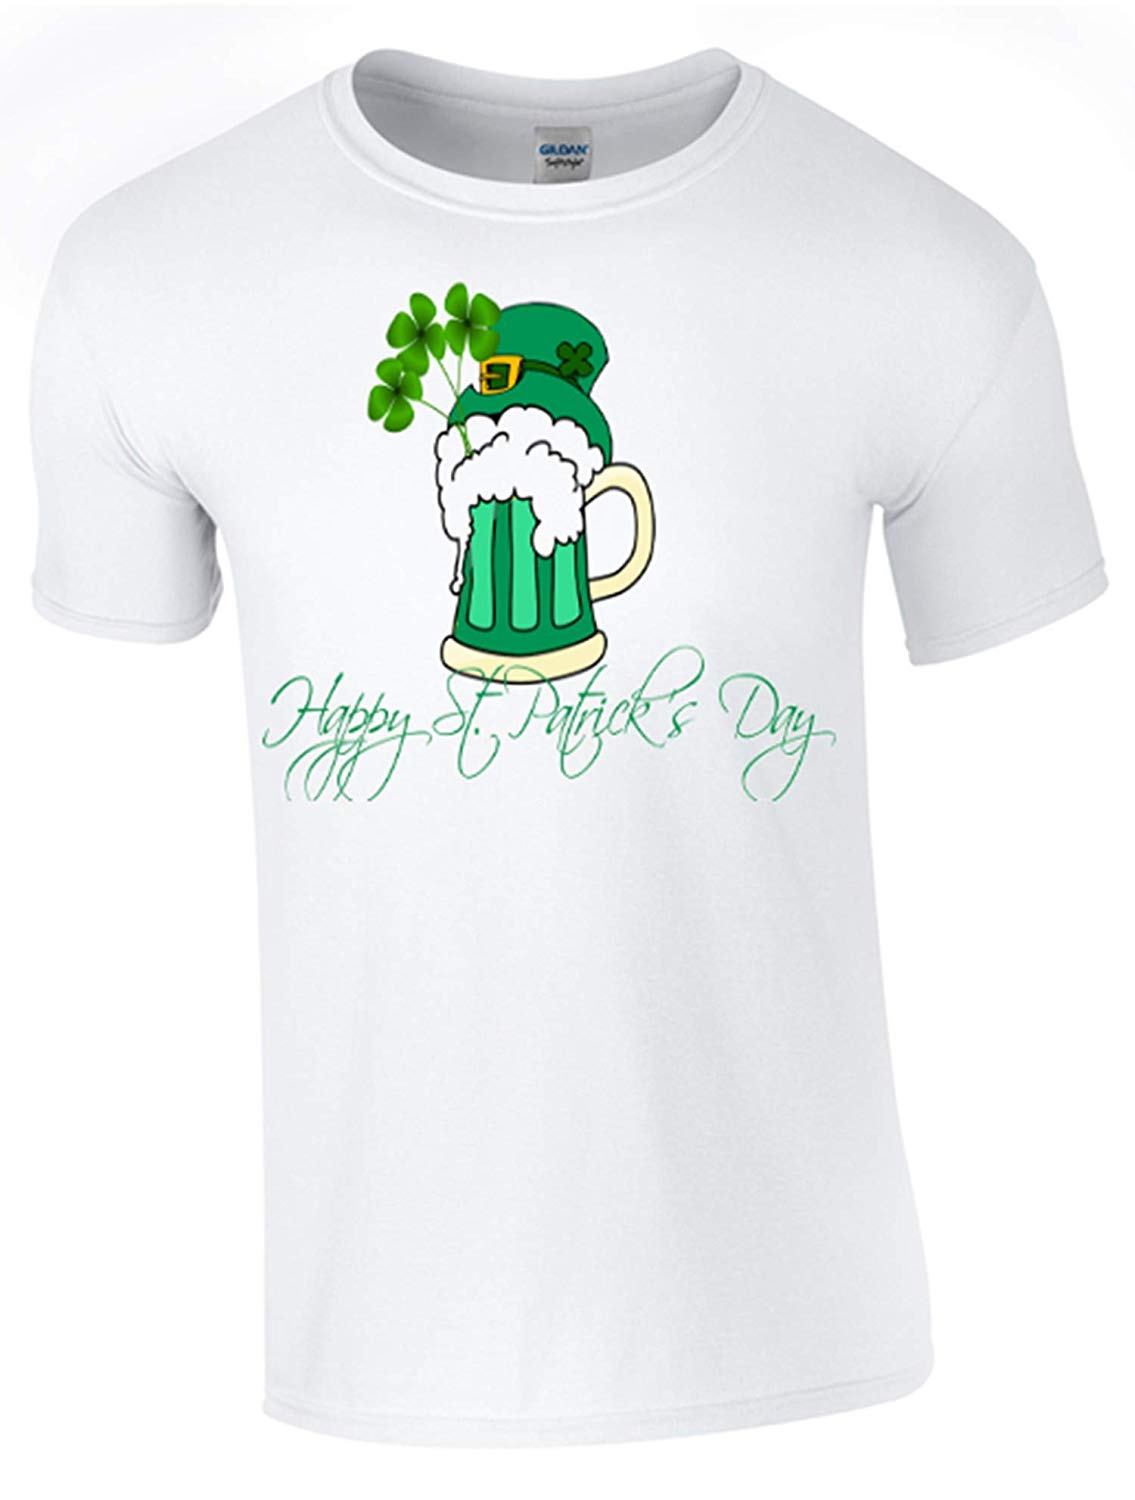 St Patrick's Day Celebration T-Shirt - Army 1157 Kit  Veterans Owned Business